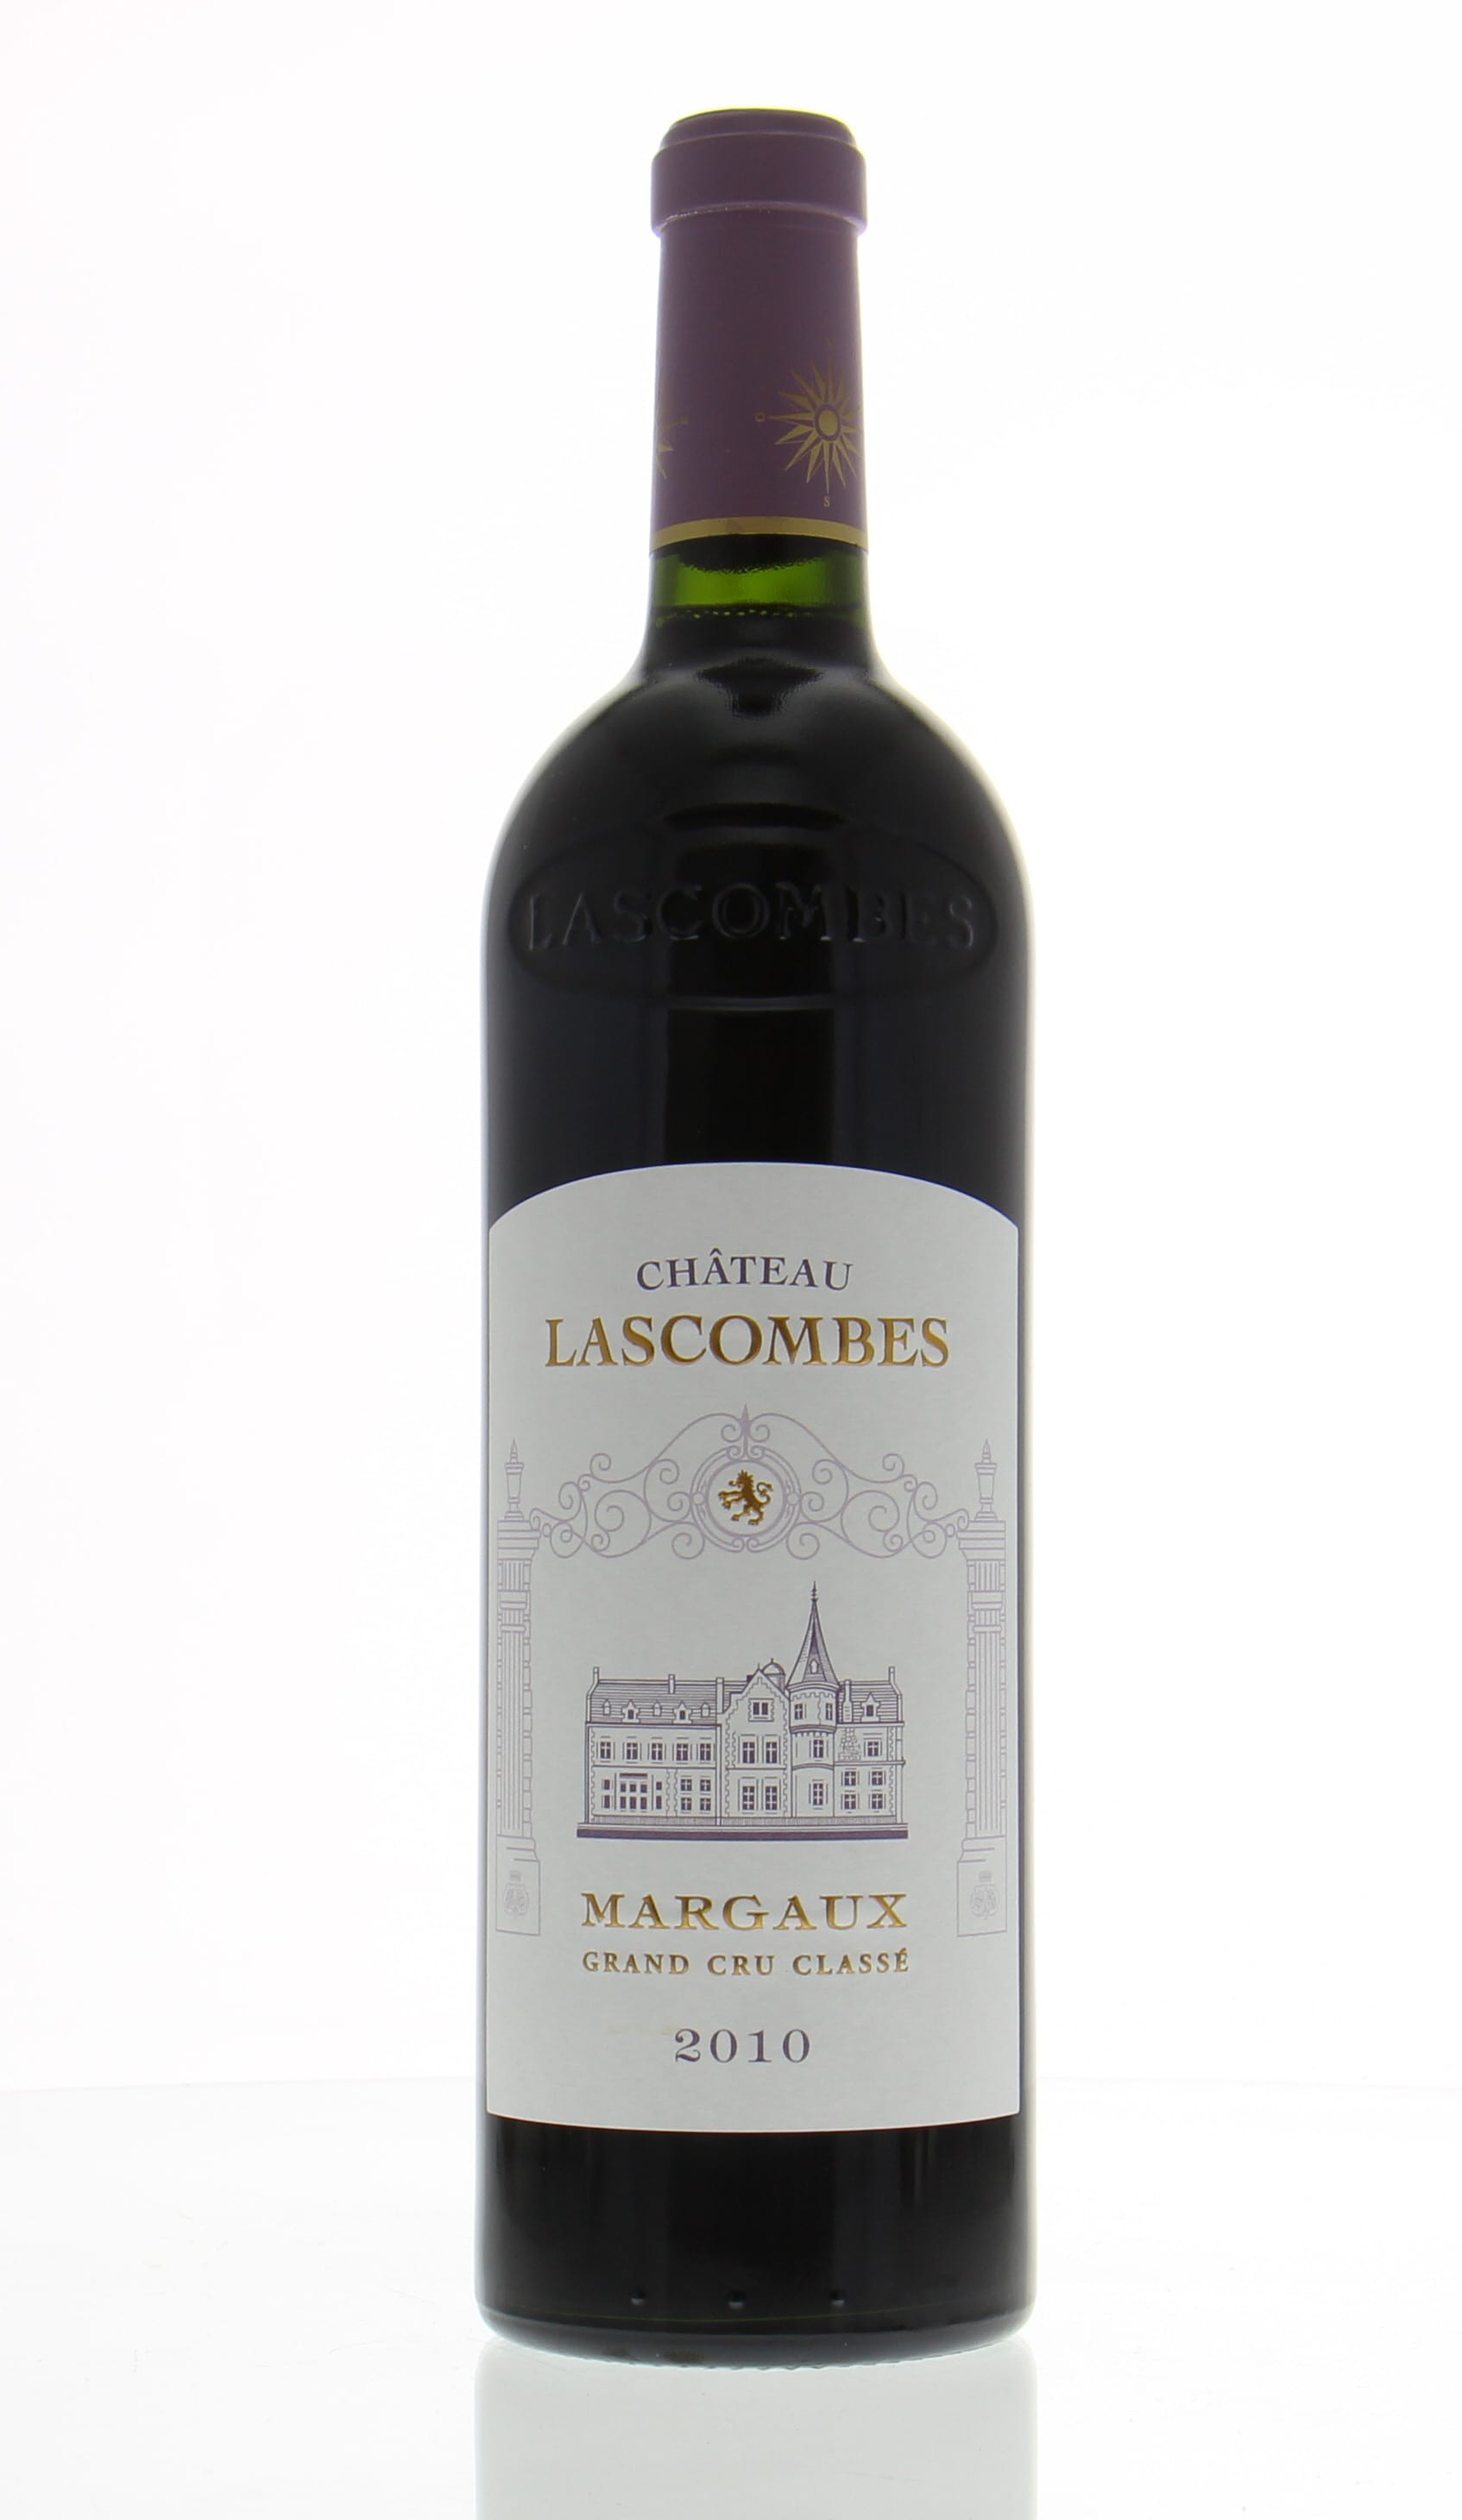 Chateau Lascombes - Chateau Lascombes 2010